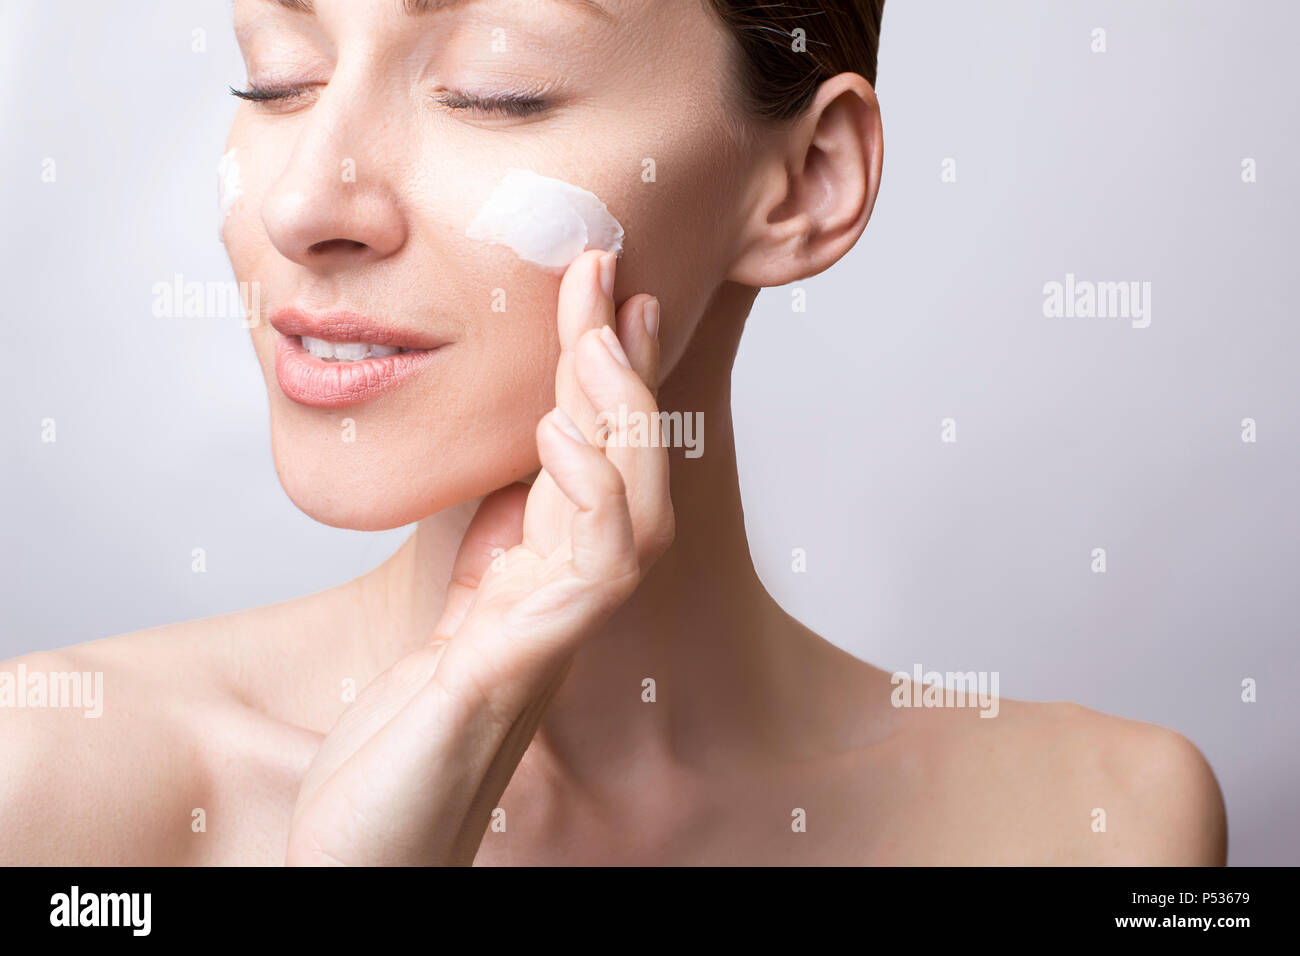 Laughing girl applying moisturizing cream on her face. Photo of young girl with flawless skin on grey background. Skin care and beauty concept Stock Photo